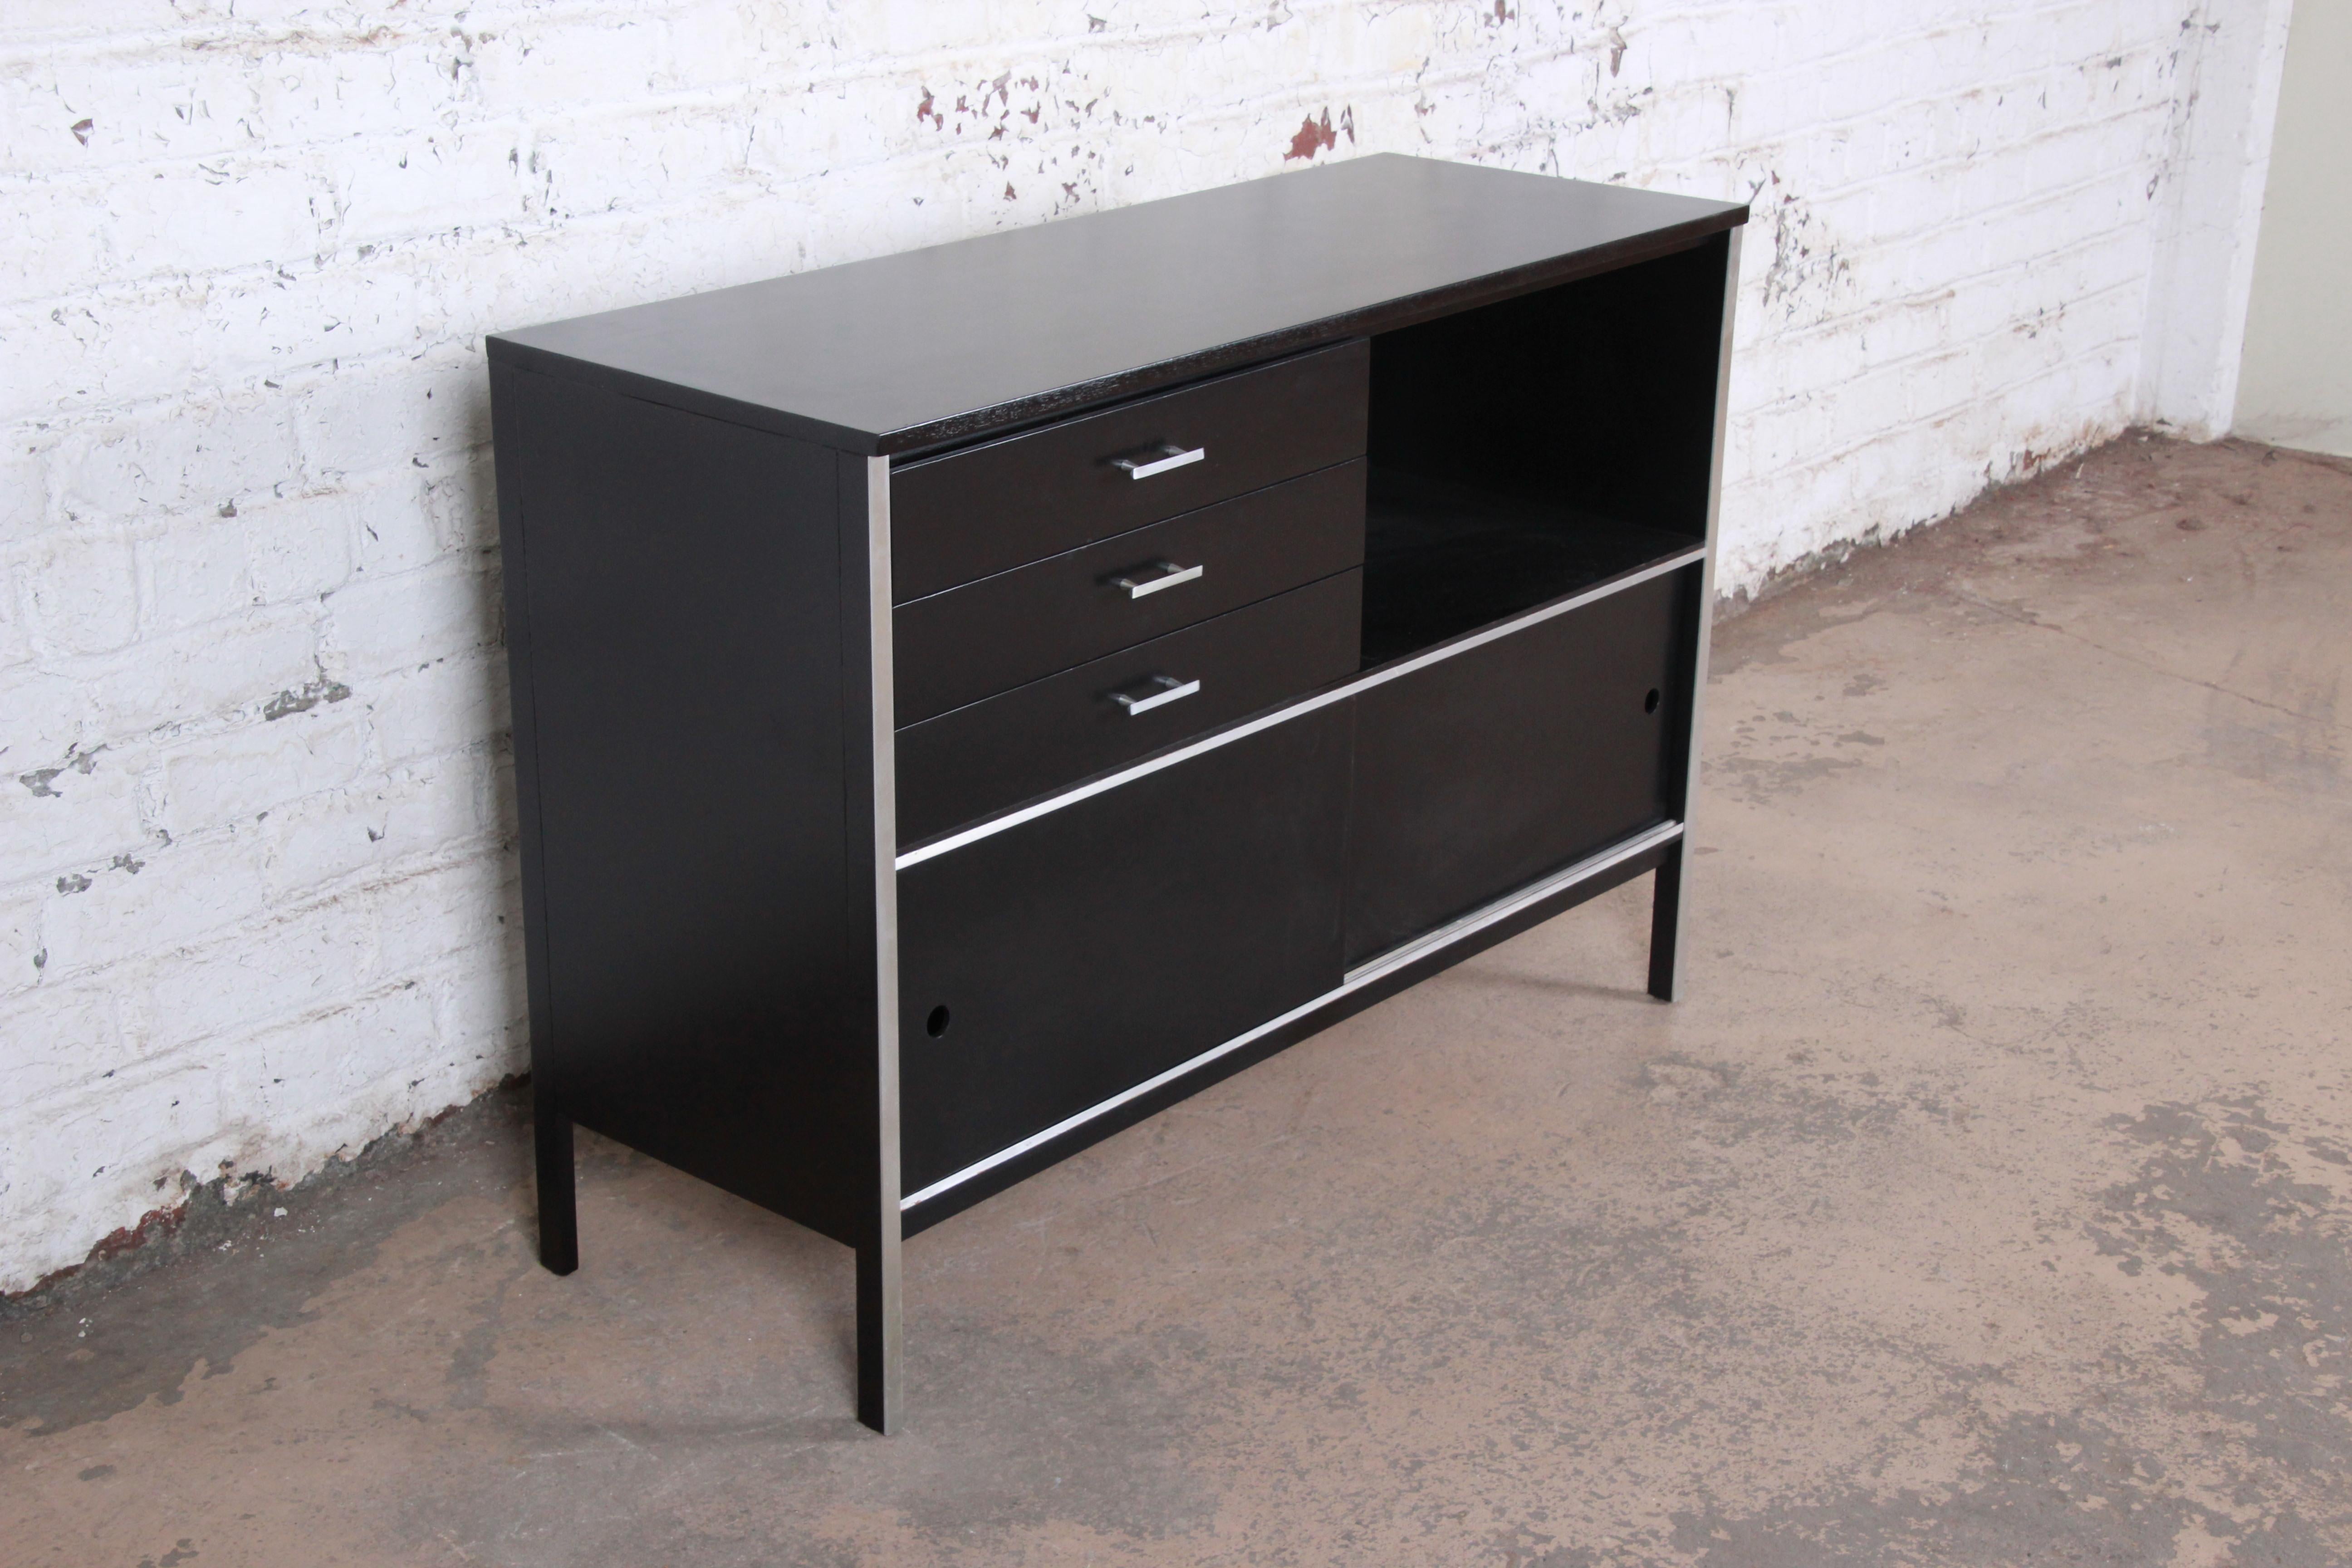 Mid-Century Modern credenza or media cabinet

Designed by Paul McCobb for Calvin Furniture 